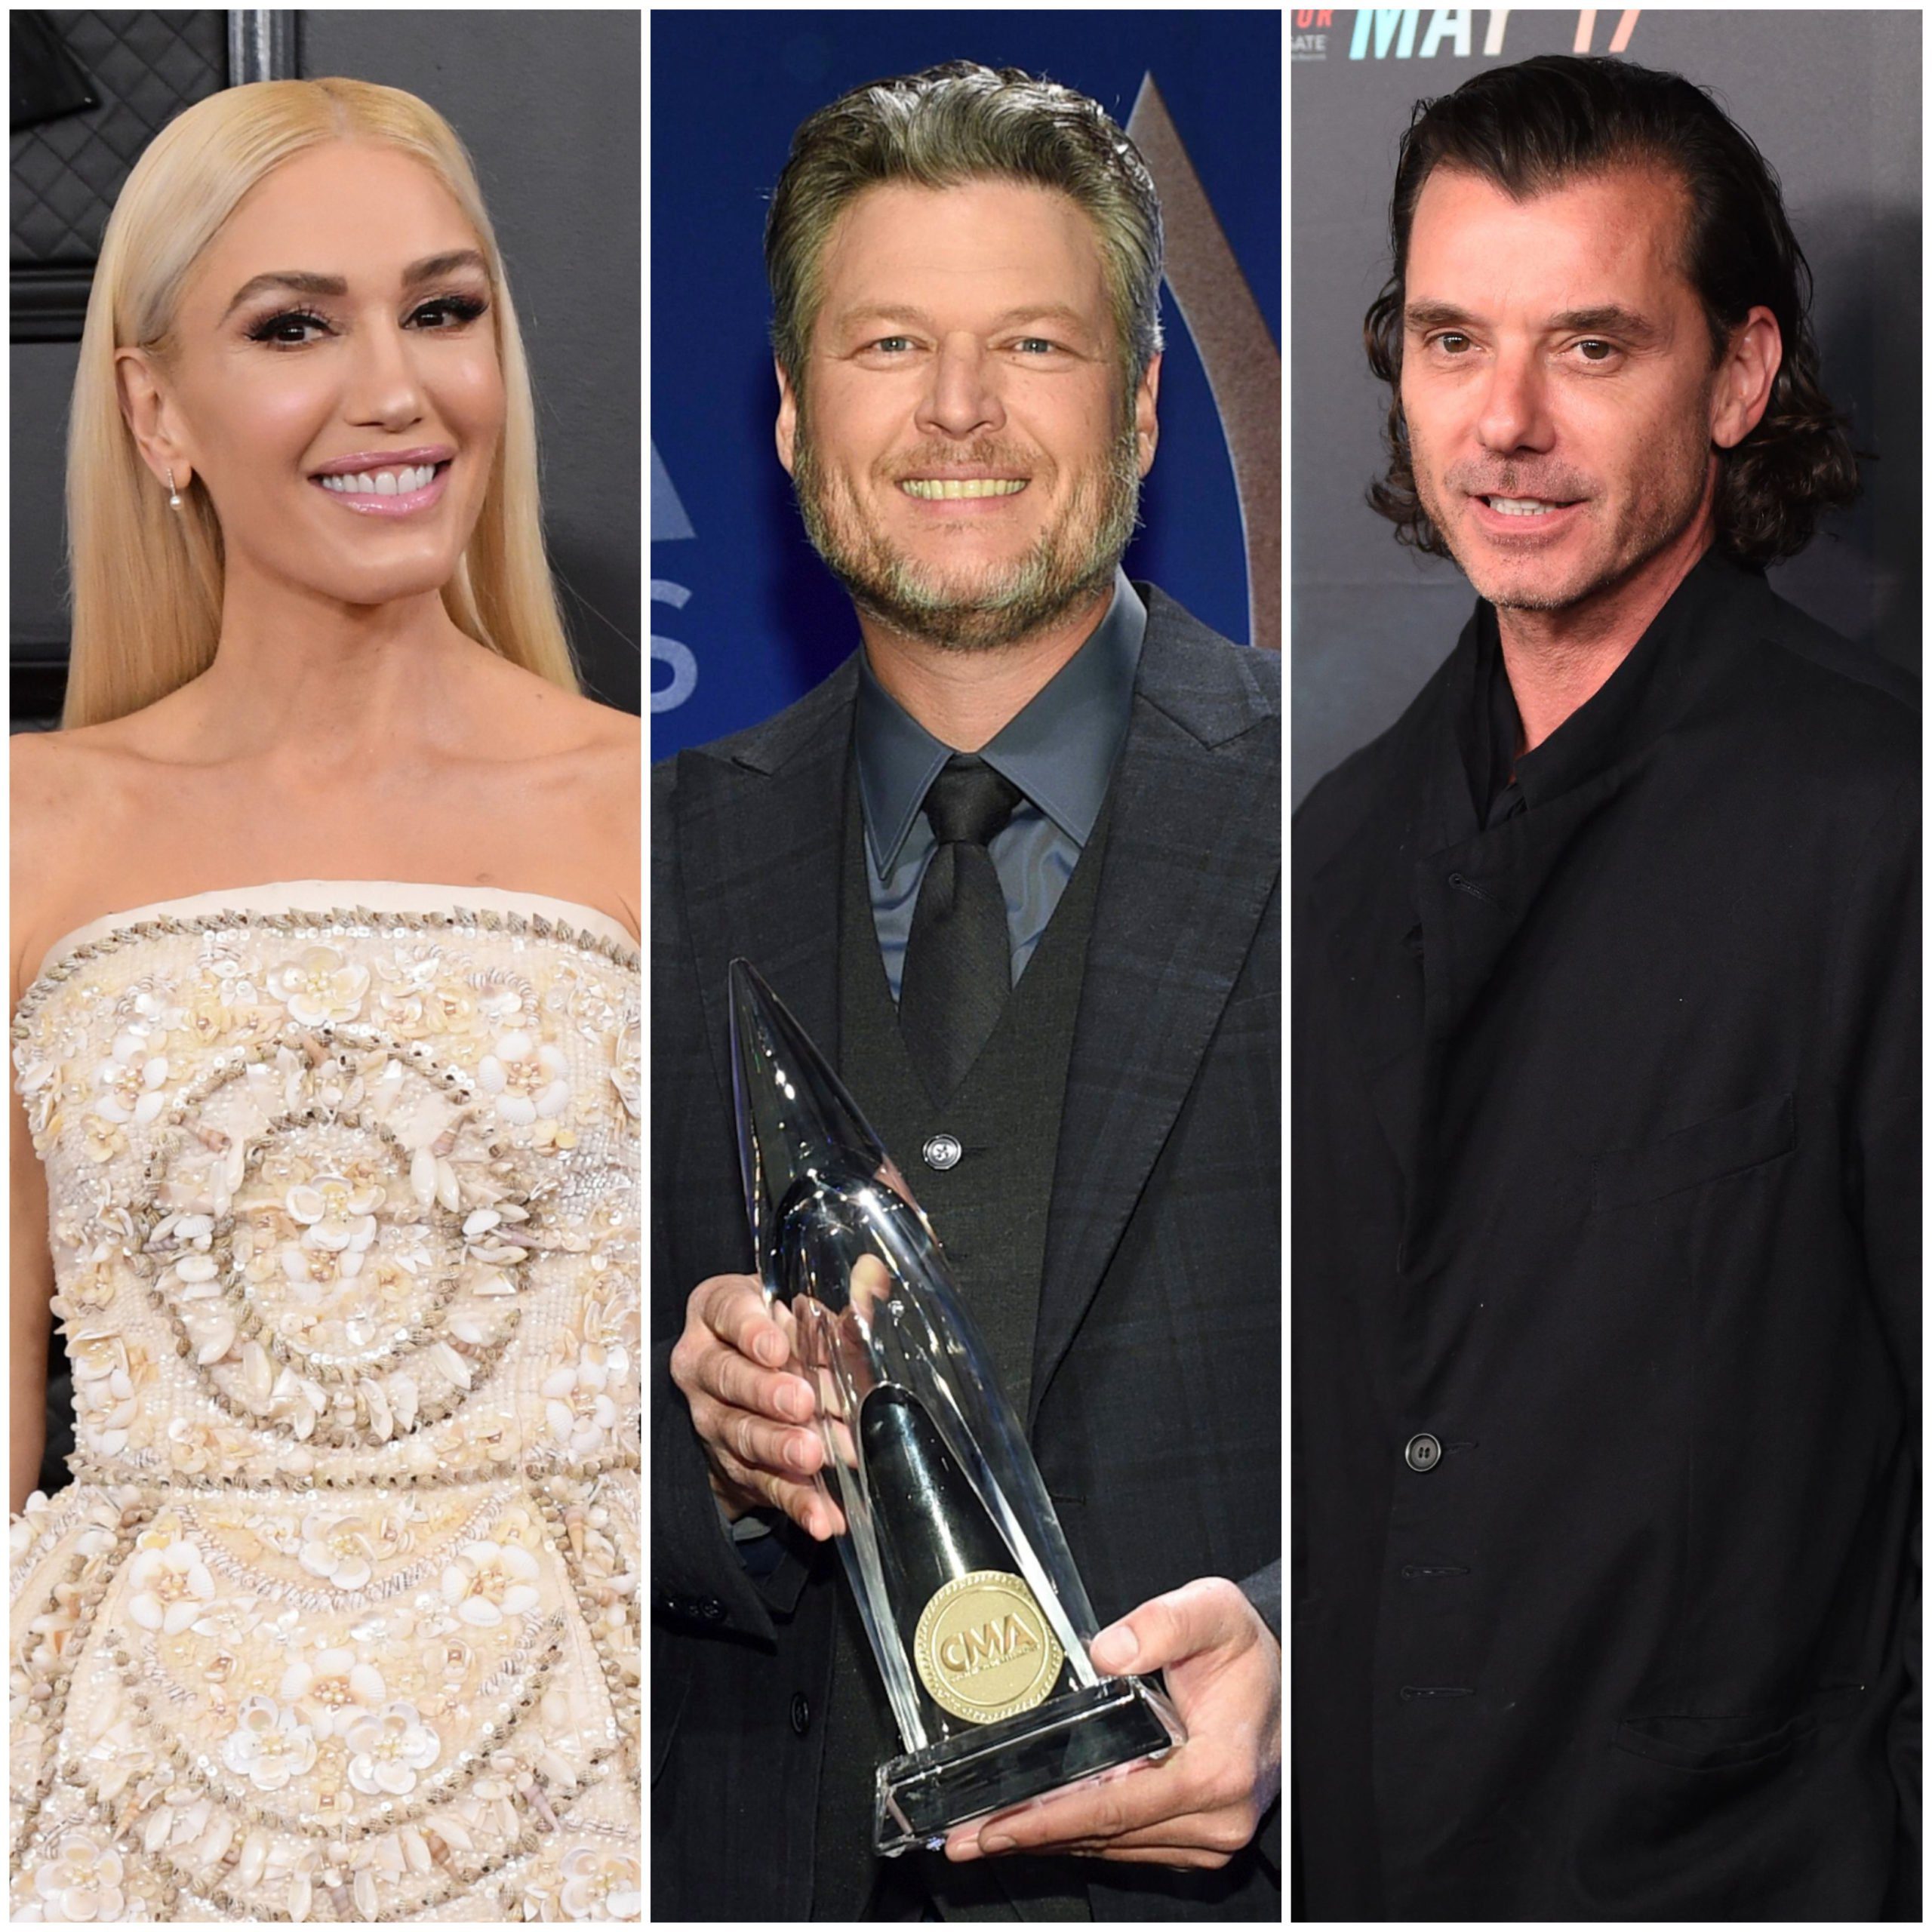 Gwen Stefani and Gavin Rossdale granted annulment.